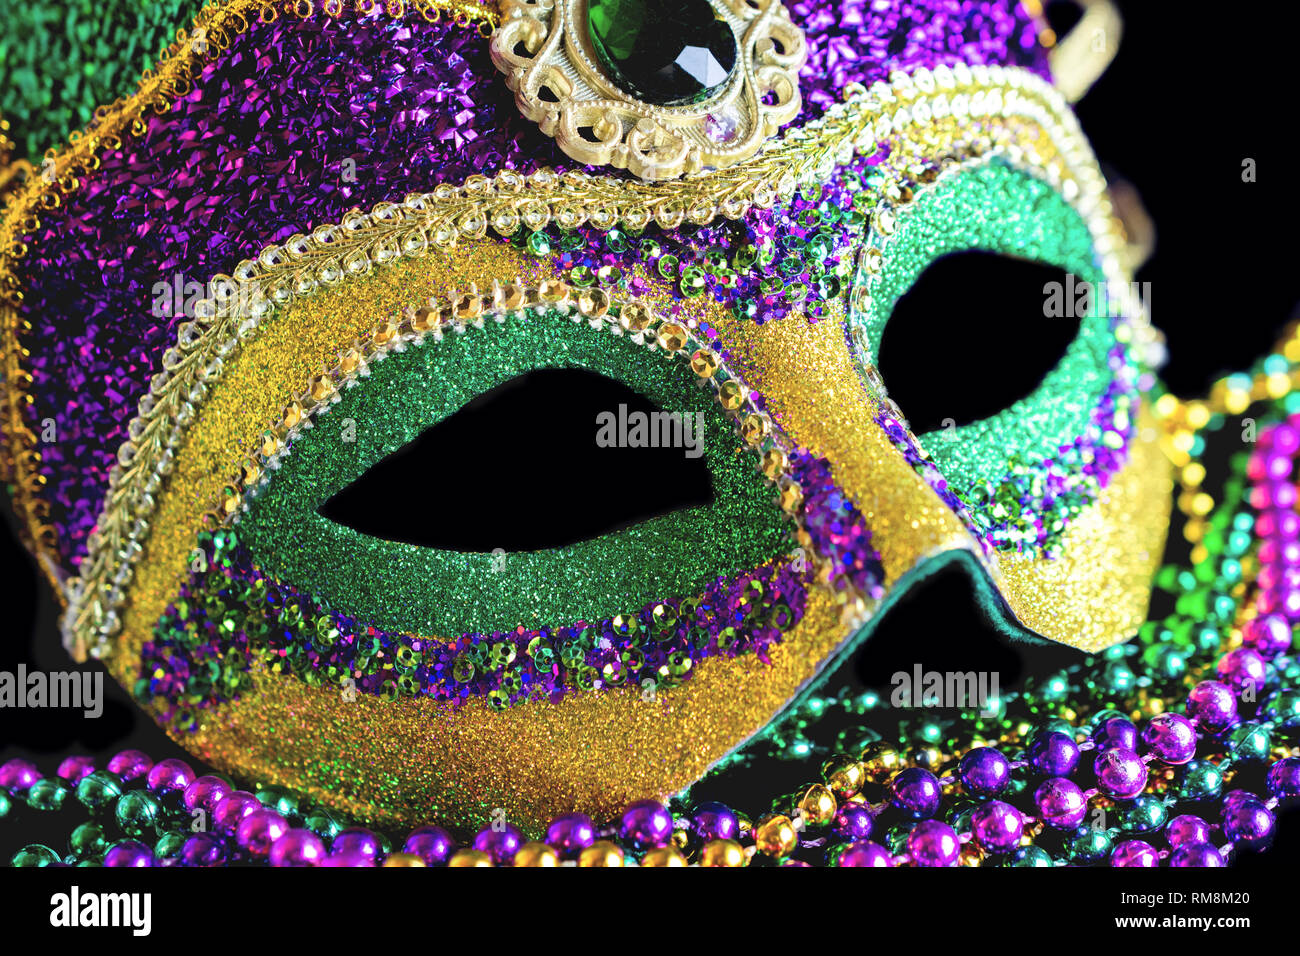 Jester mask close up with beads on a black background. Stock Photo